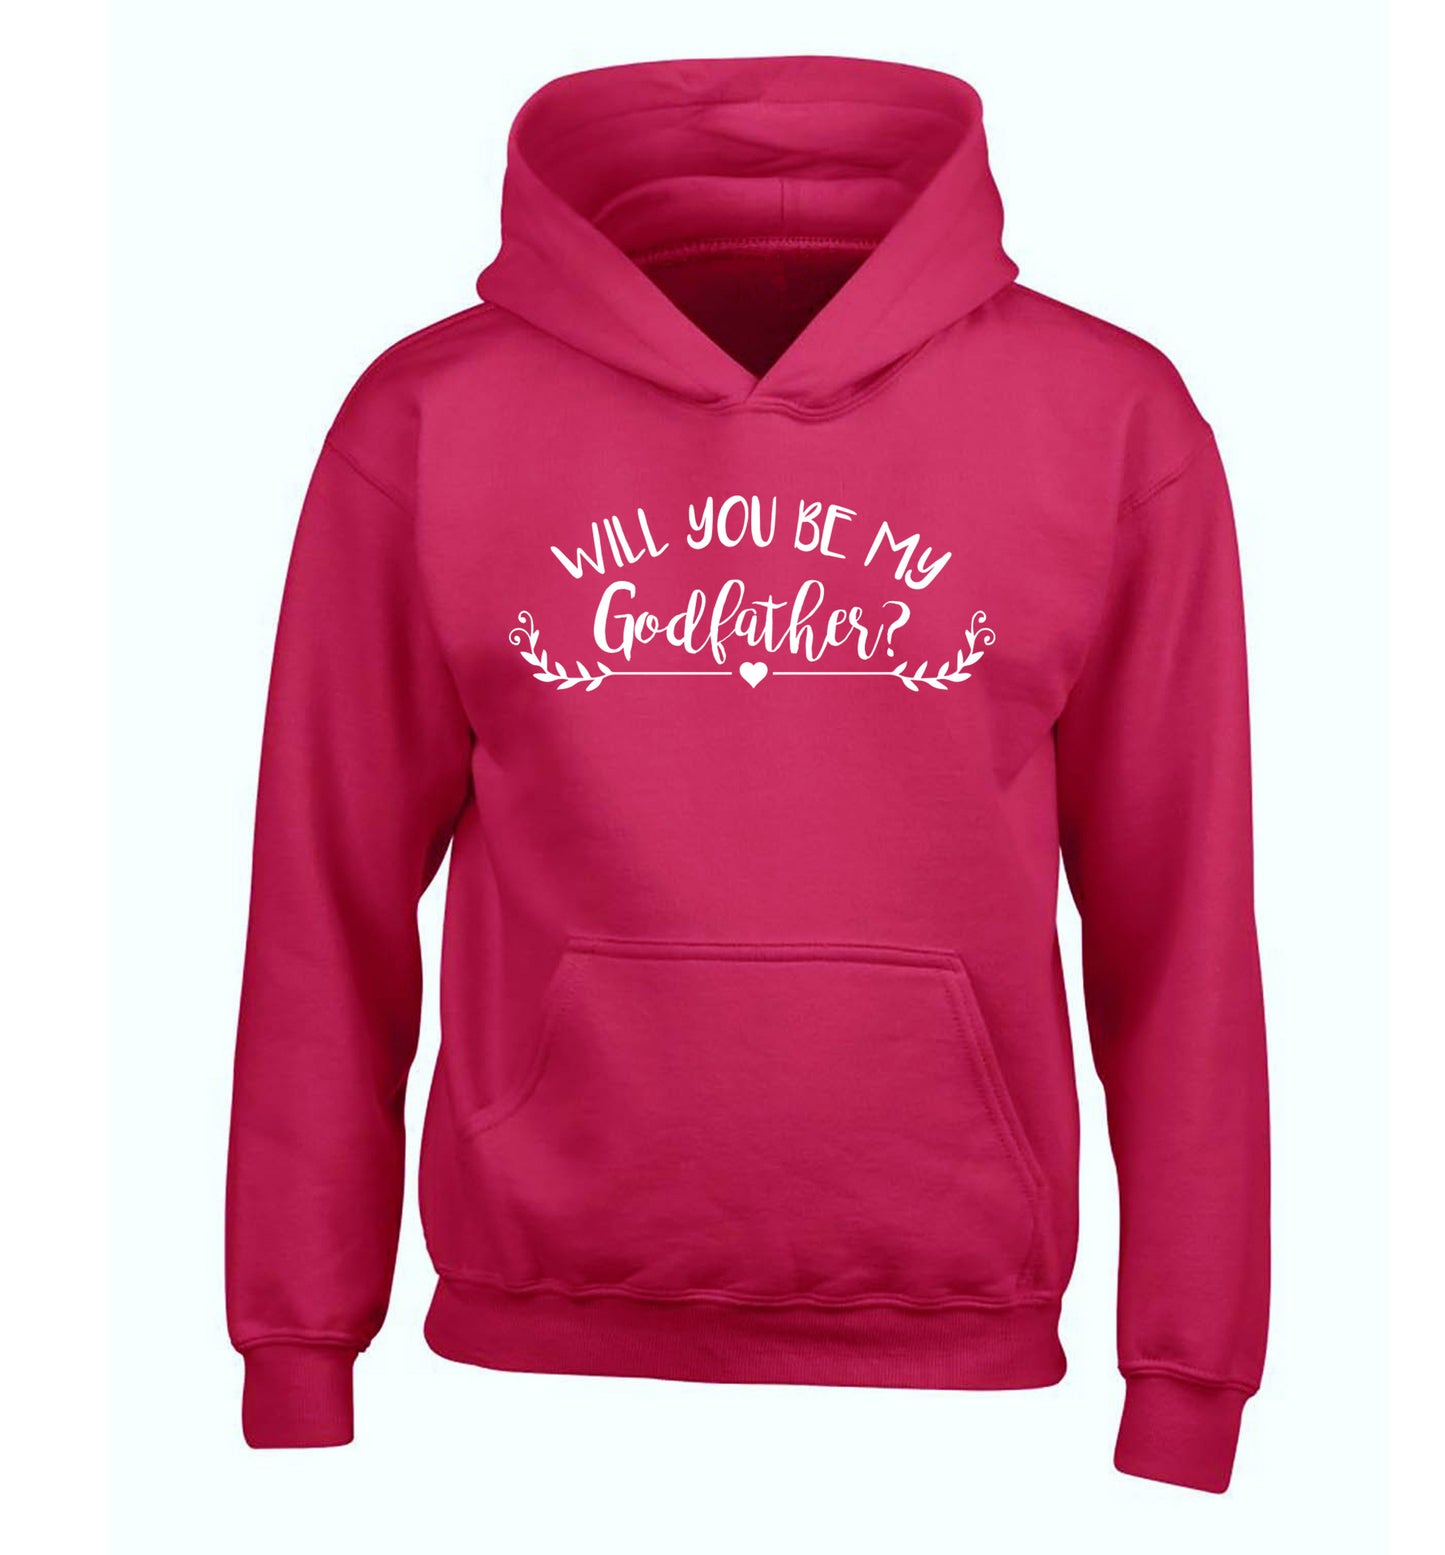 Will you be my godfather? children's pink hoodie 12-14 Years